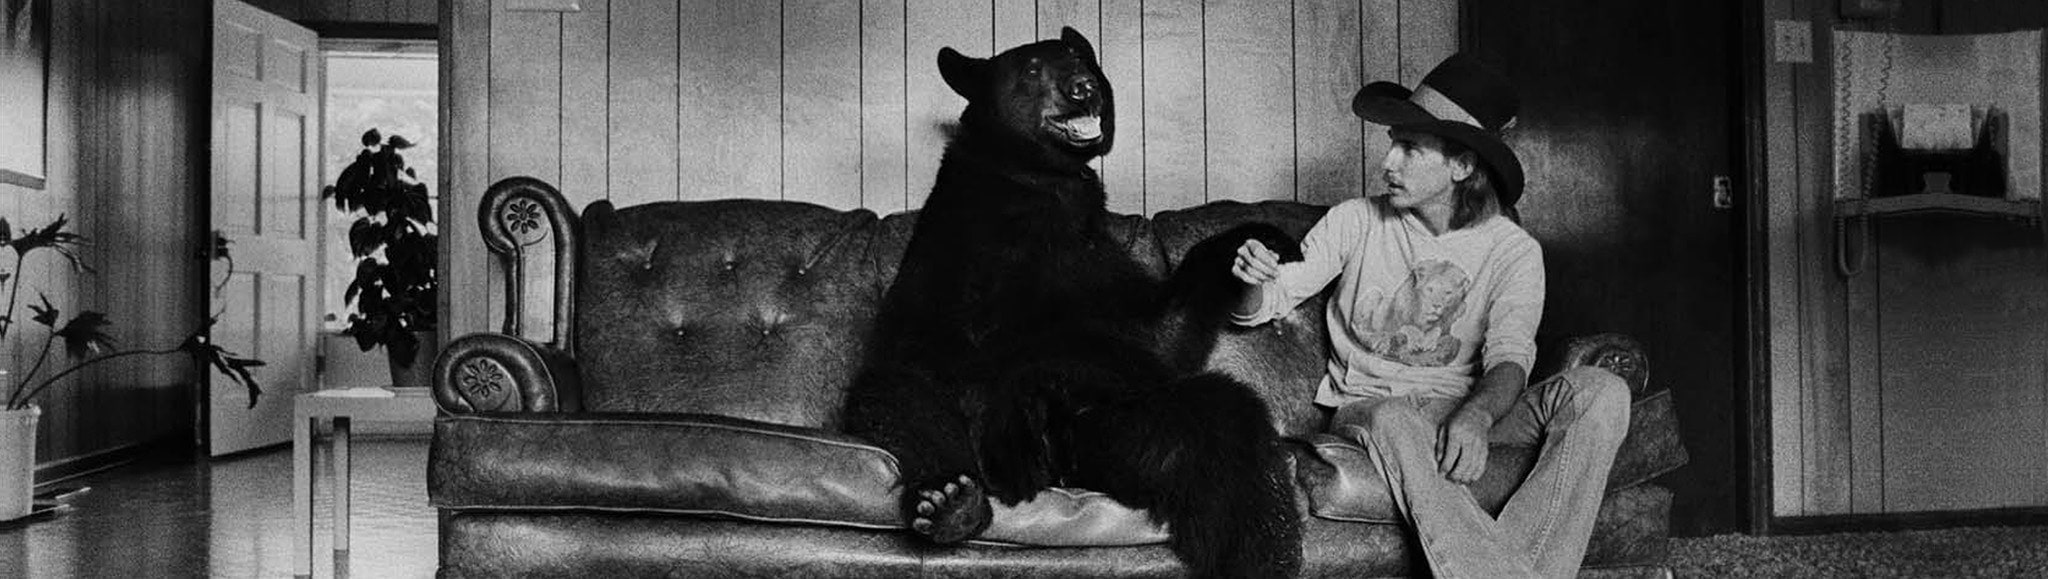 Black bear sitting on a couch with a man in a hat in the 70s